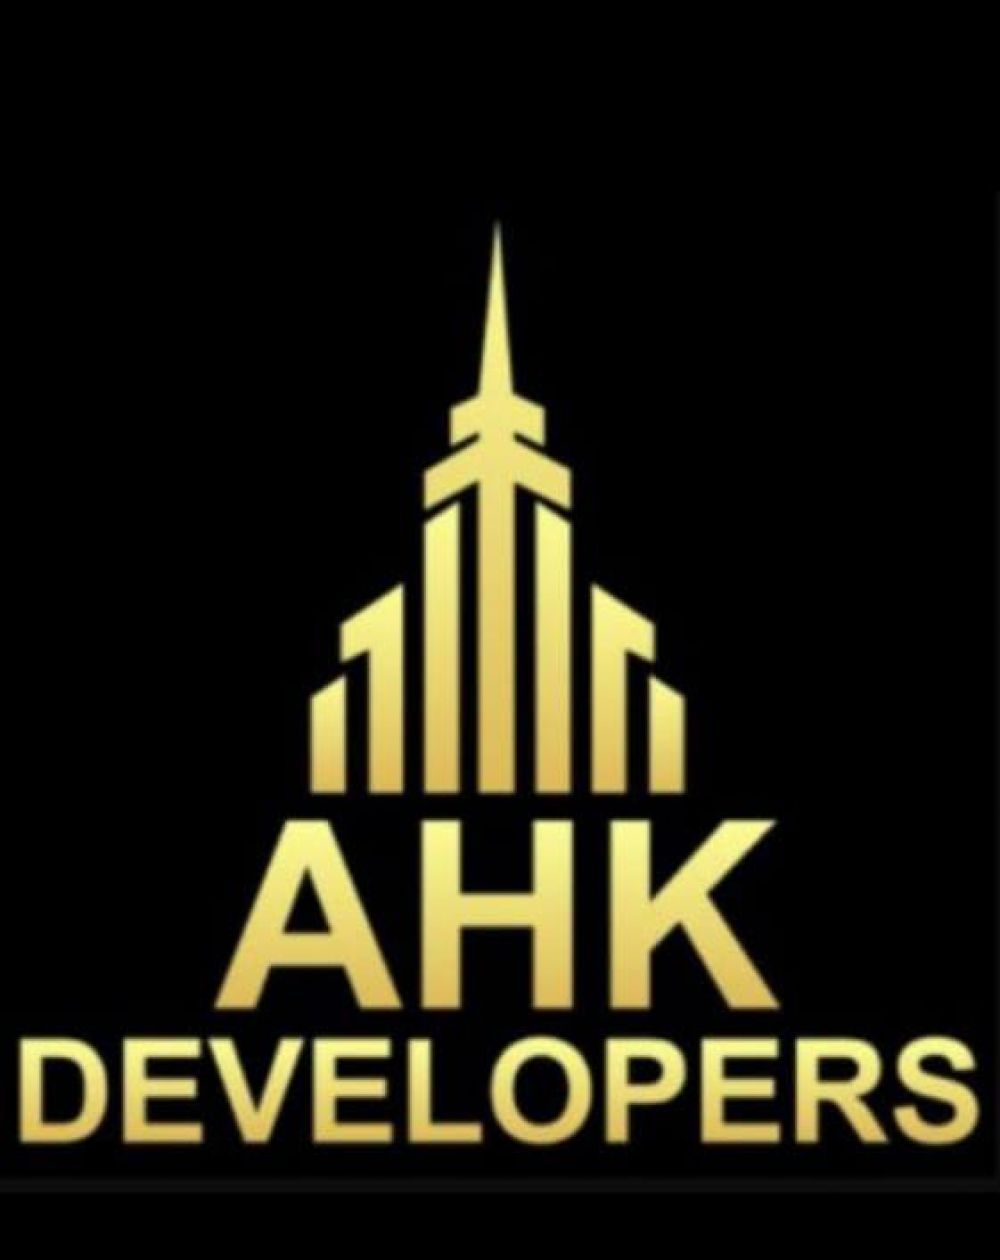 Realestate Agent Khalid  Hassan working in Realestate Agency AHK  Developers